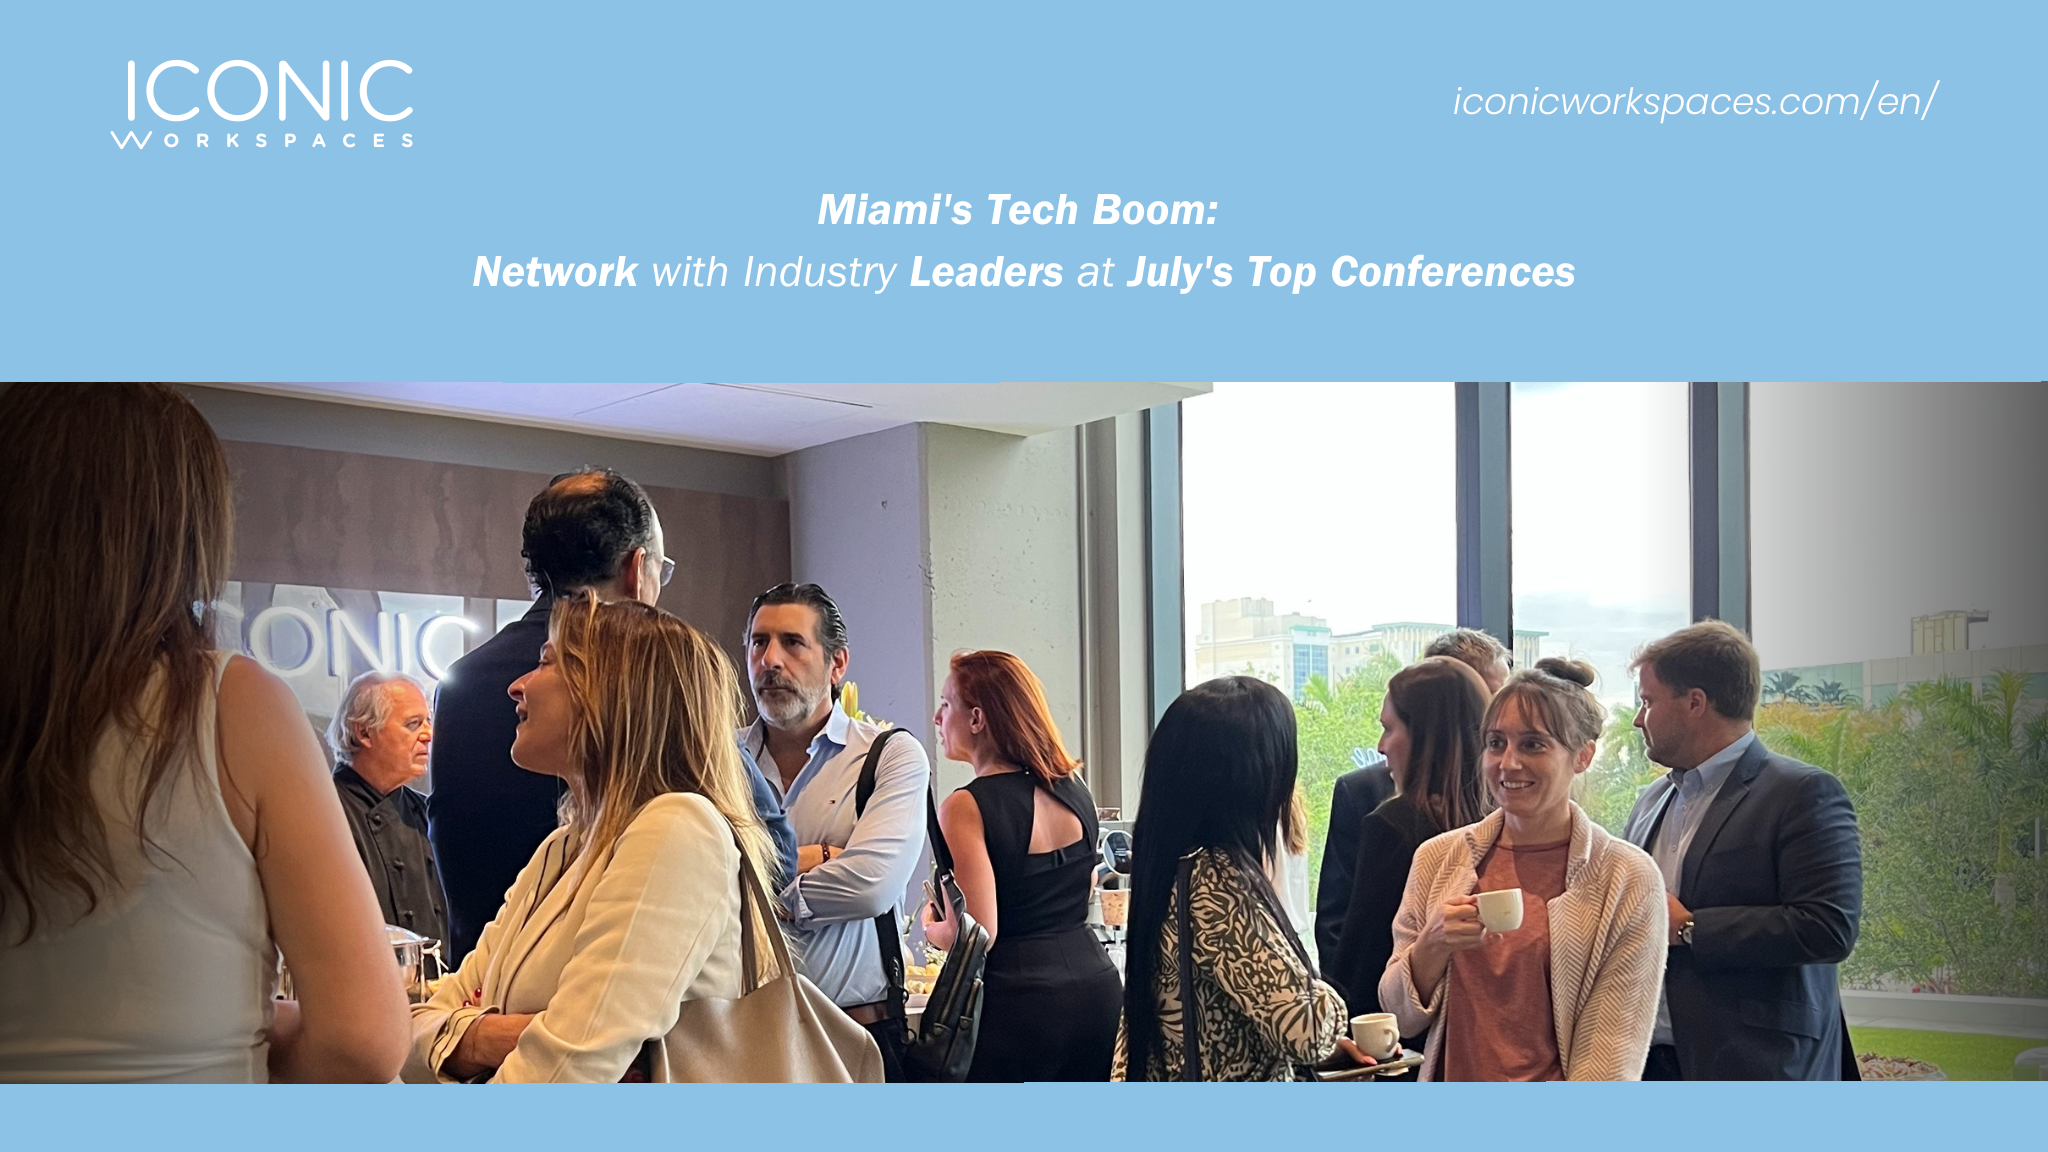 Miami's Tech Boom: Network with Industry Leaders at July's Top Conferences